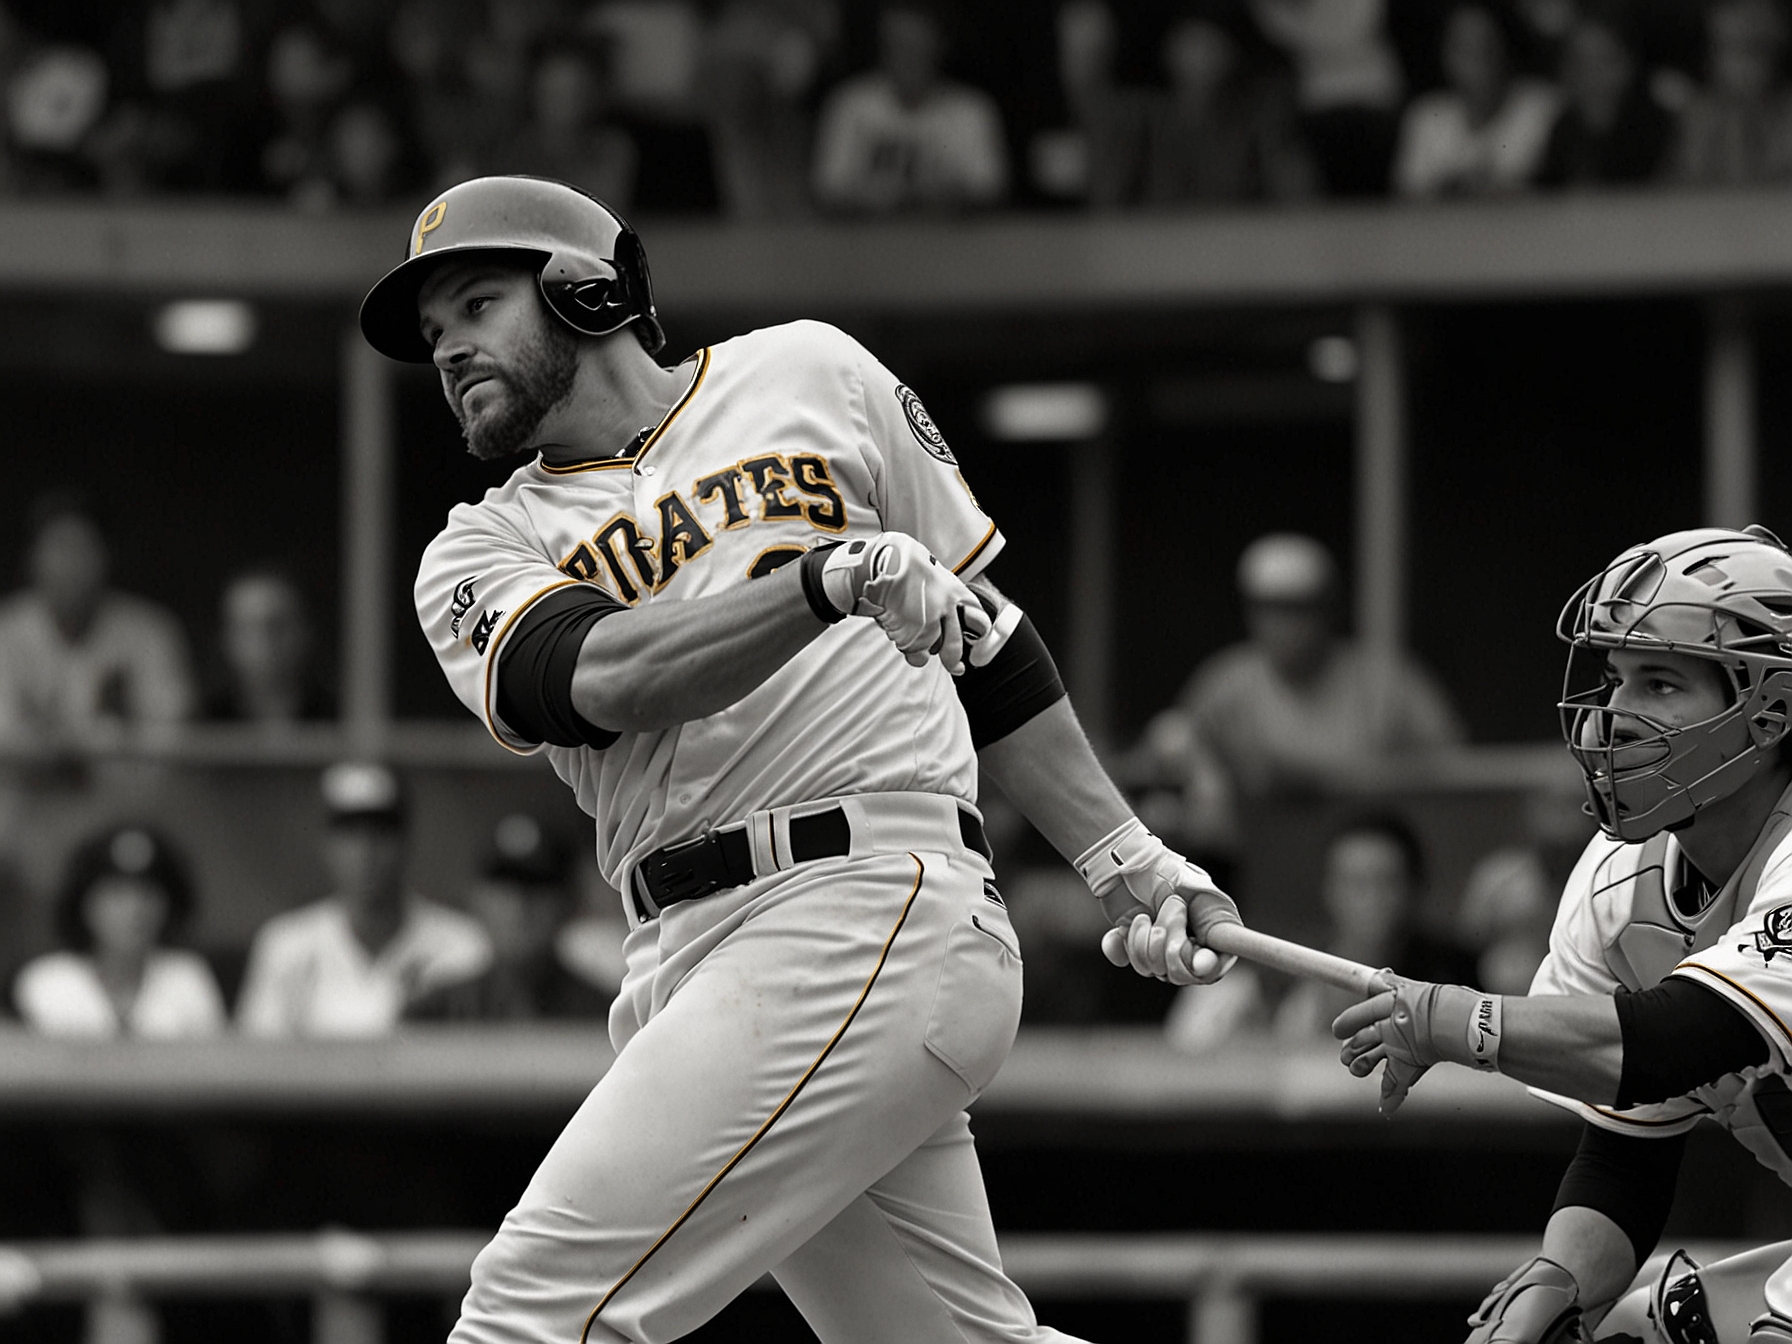 Bryan Reynolds of the Pittsburgh Pirates is captured mid-swing, hitting a two-run homer that provided crucial run support for Paul Skenes in their victory over the Reds.